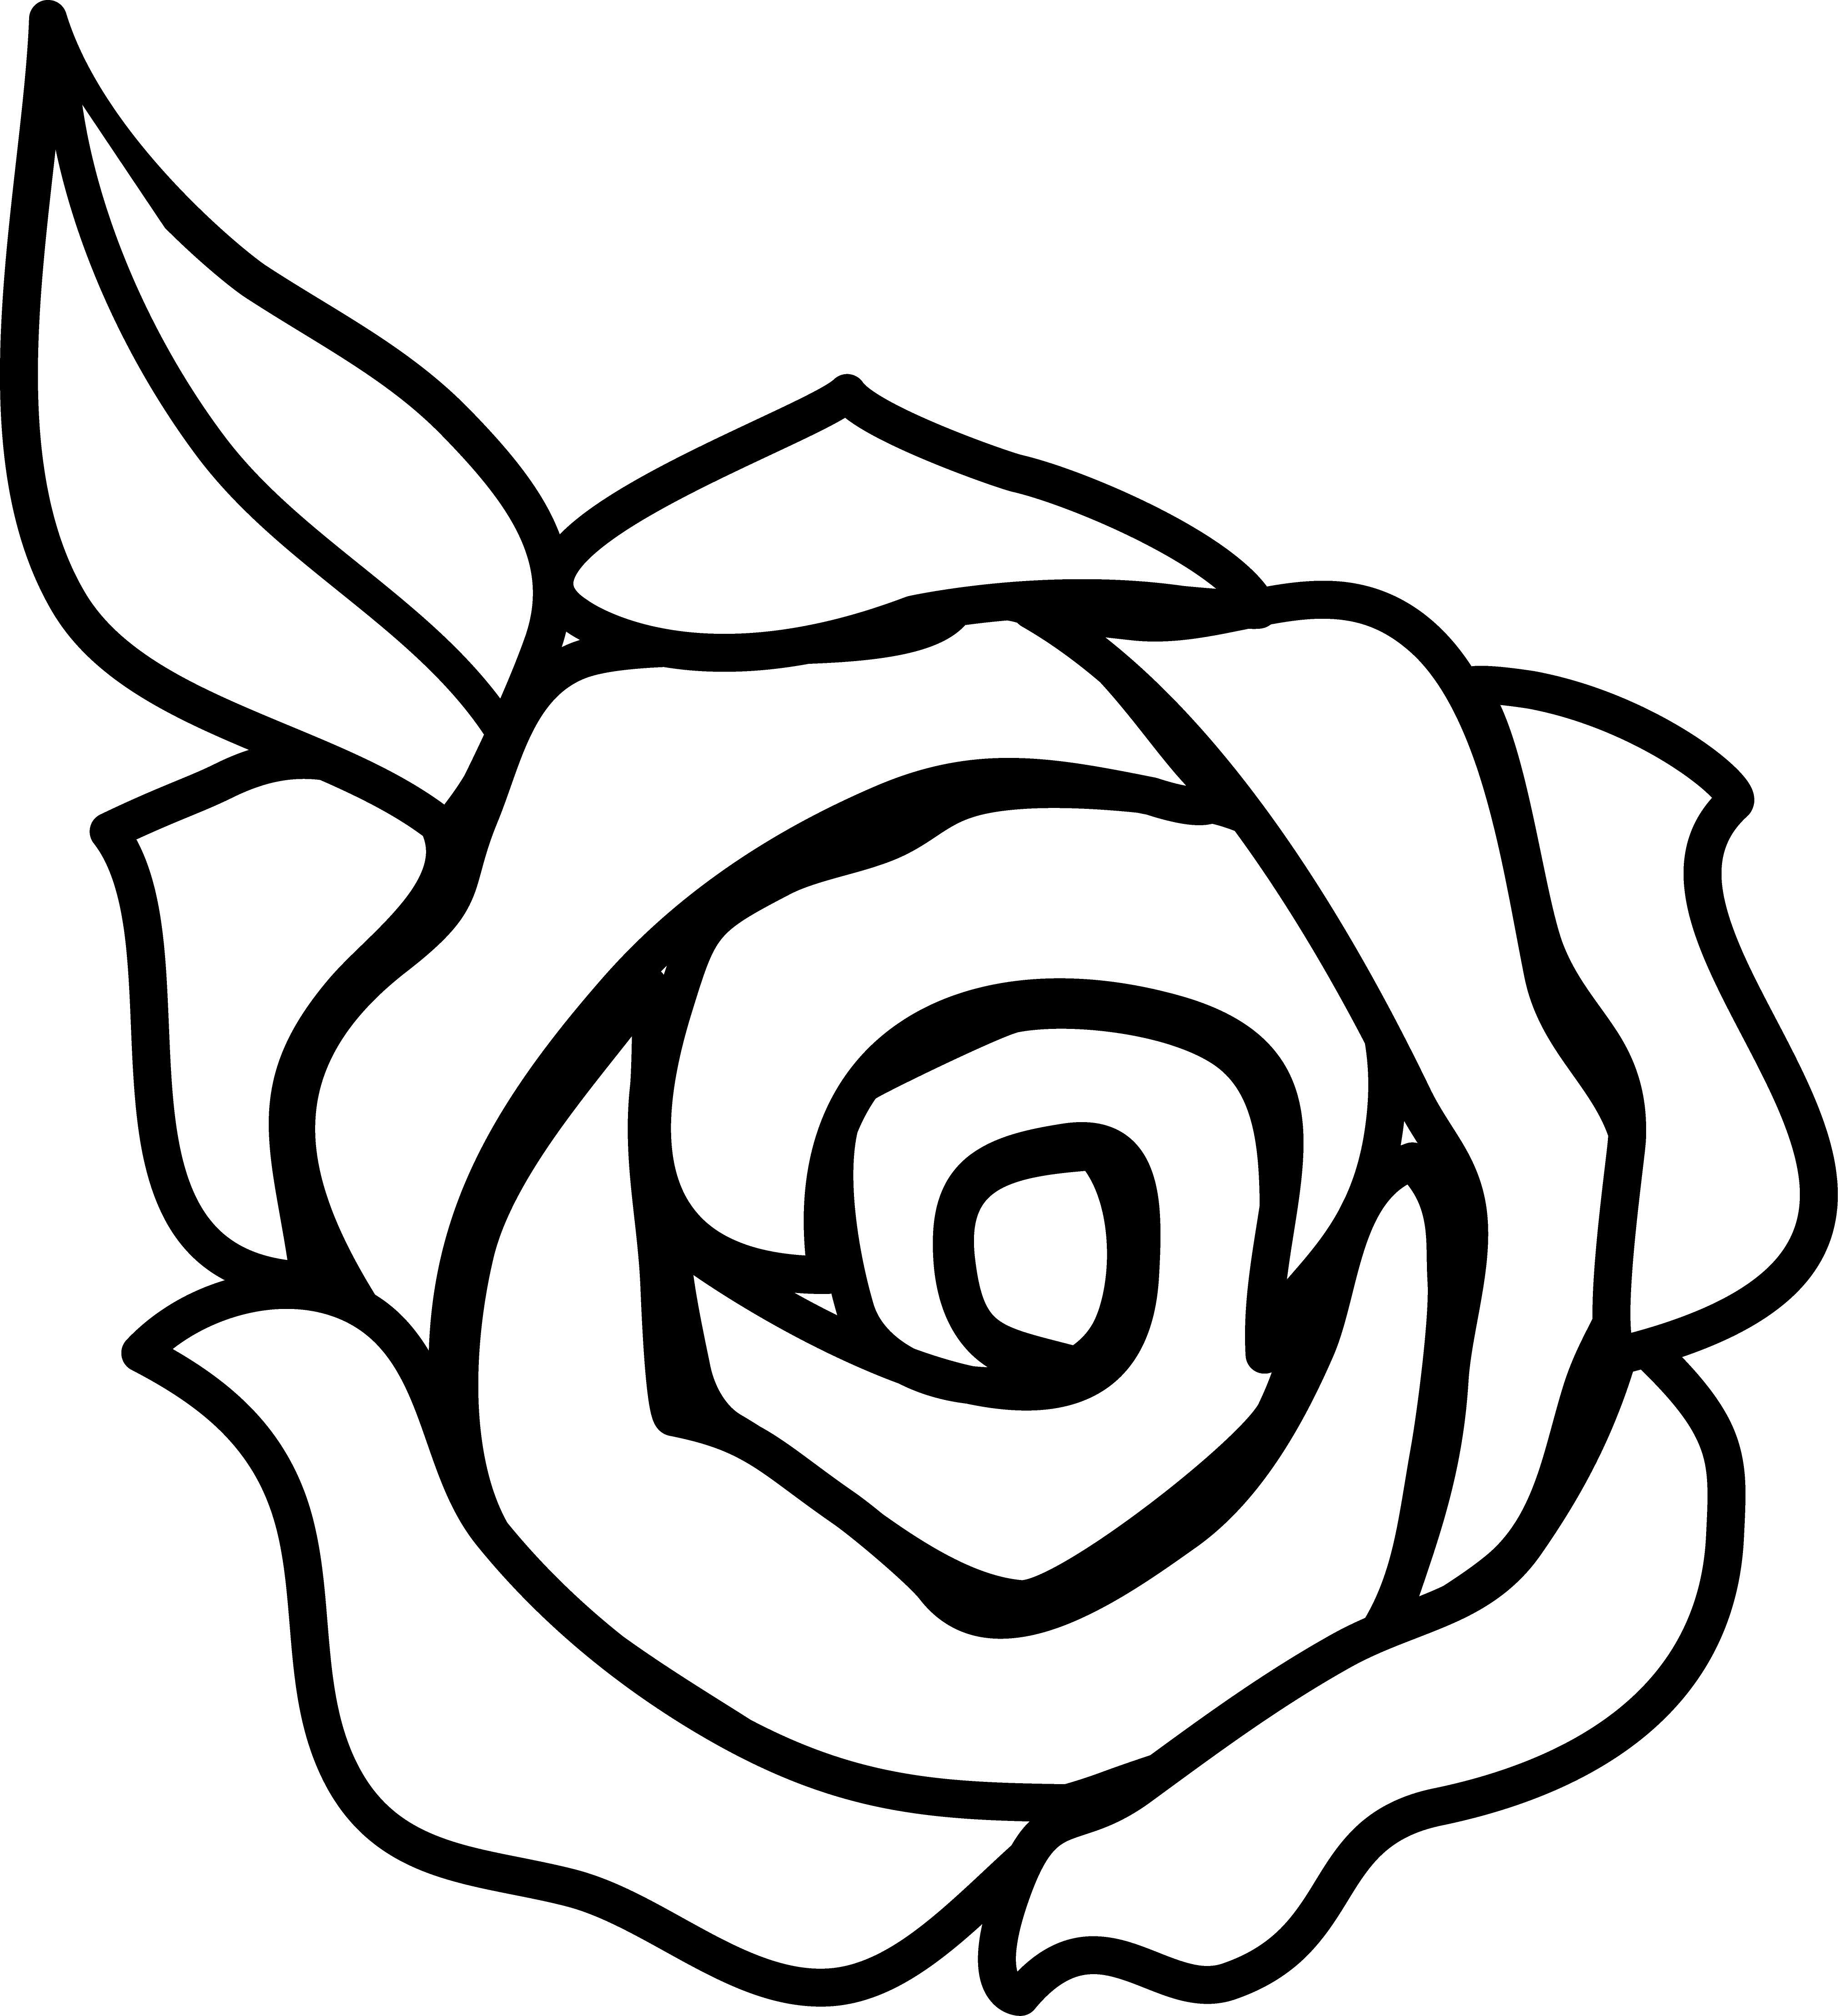 Free Drawings Of Roses In Black And White Download Free Clip Art Free Clip Art On Clipart Library